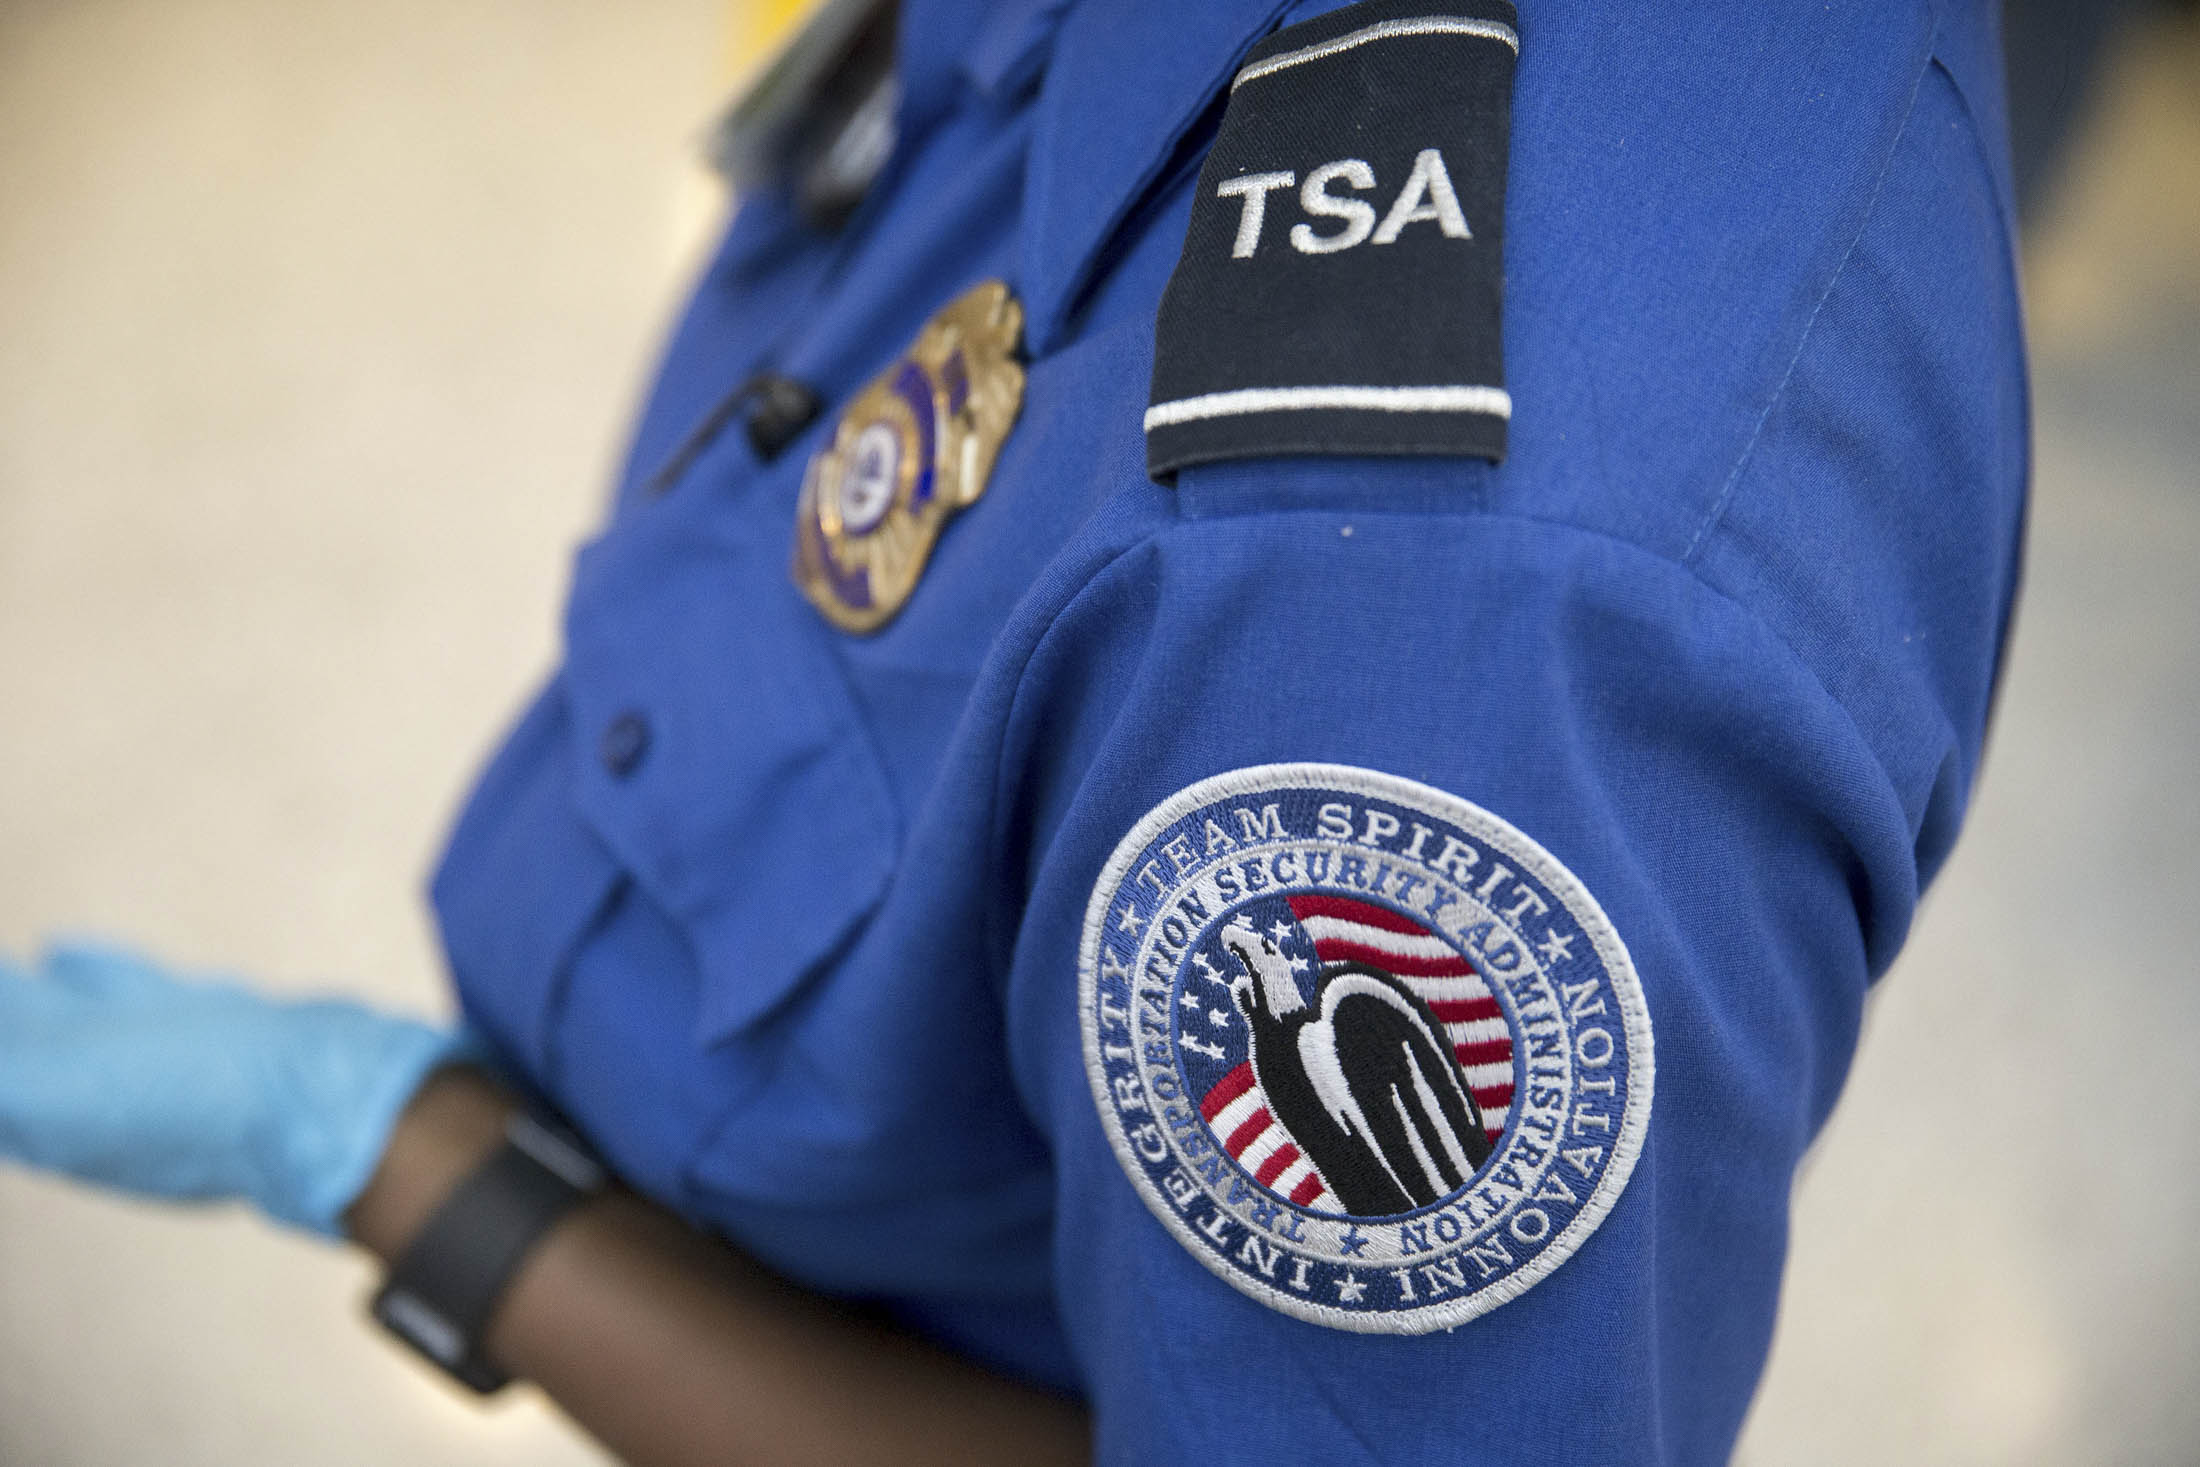 A Transportation Security Administration (TSA) officer stands in the TSA pre-check area at Dulles International Airport in Dulles, Va., on Aug. 19, 2015..
